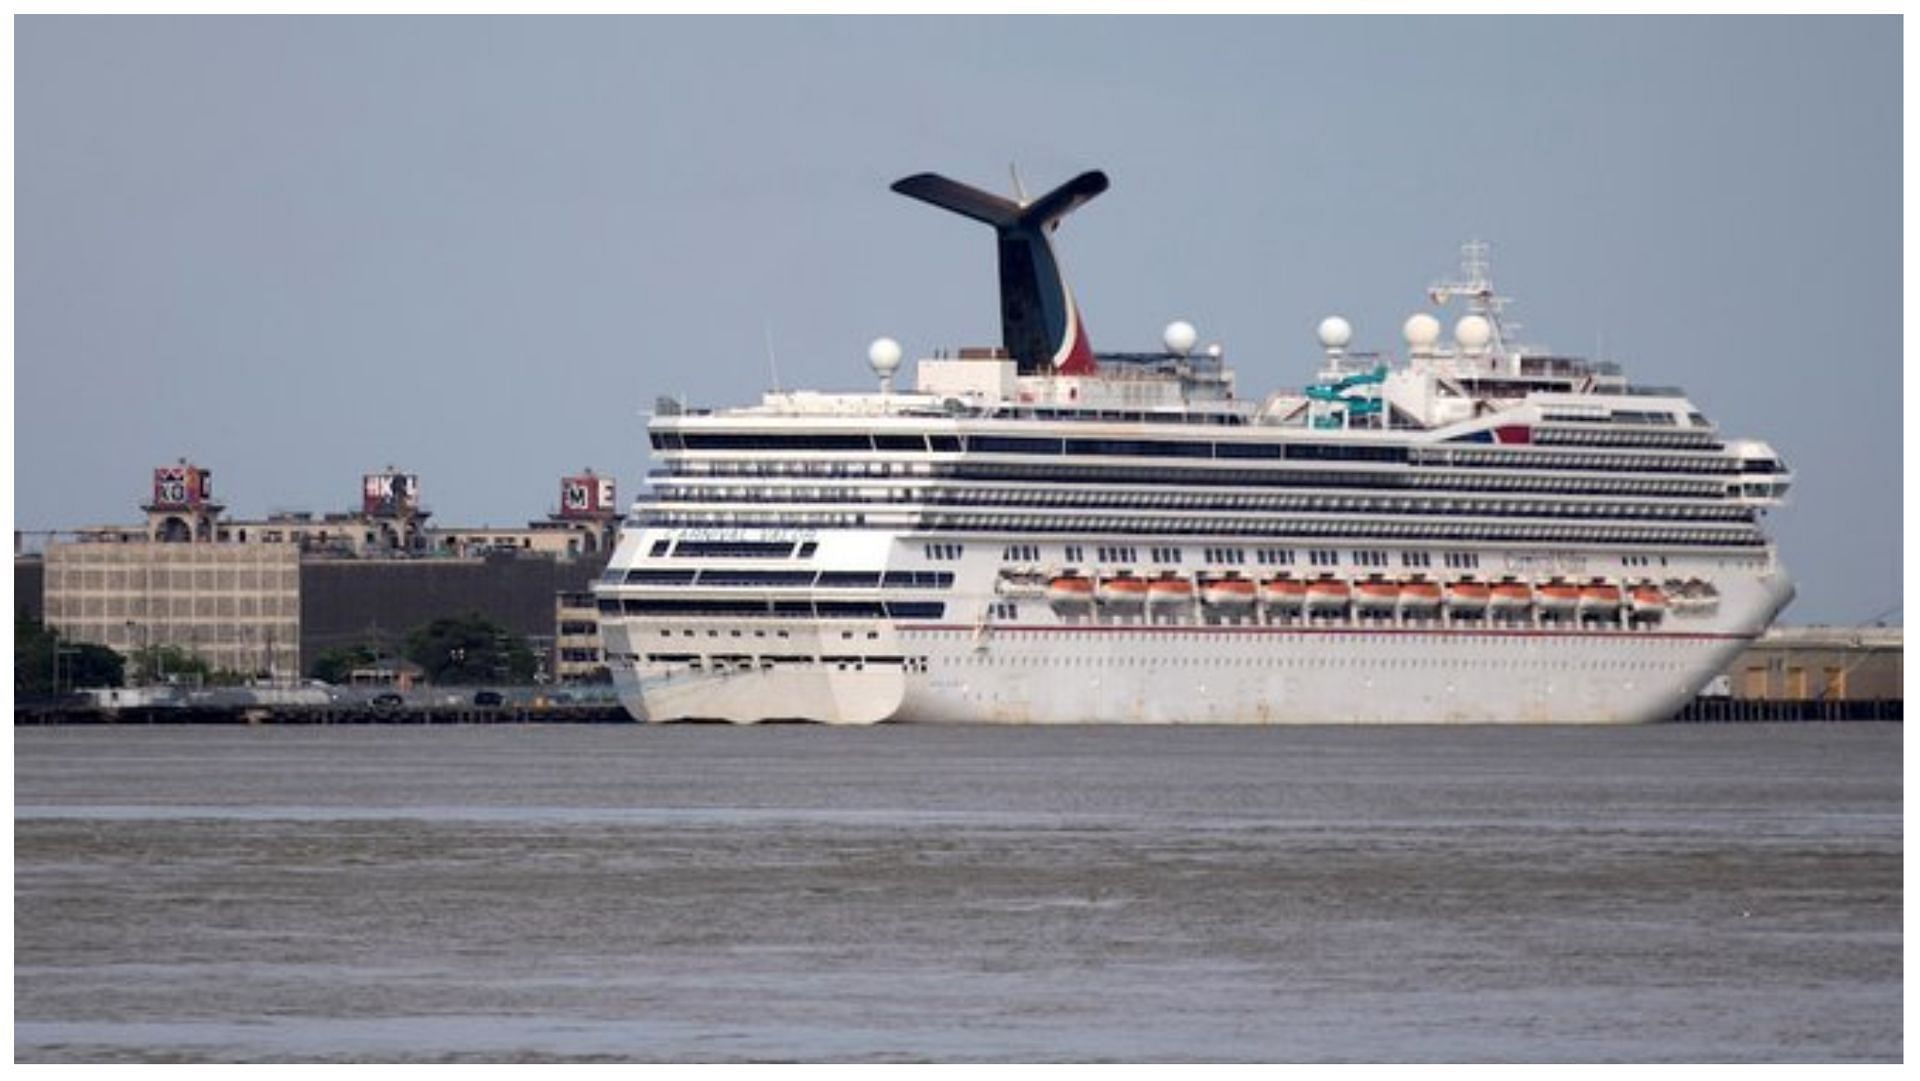 28-year-old man who went missing from the Carnival valor was rescued, (image via Sofia Rita Belmonte/Twitter)